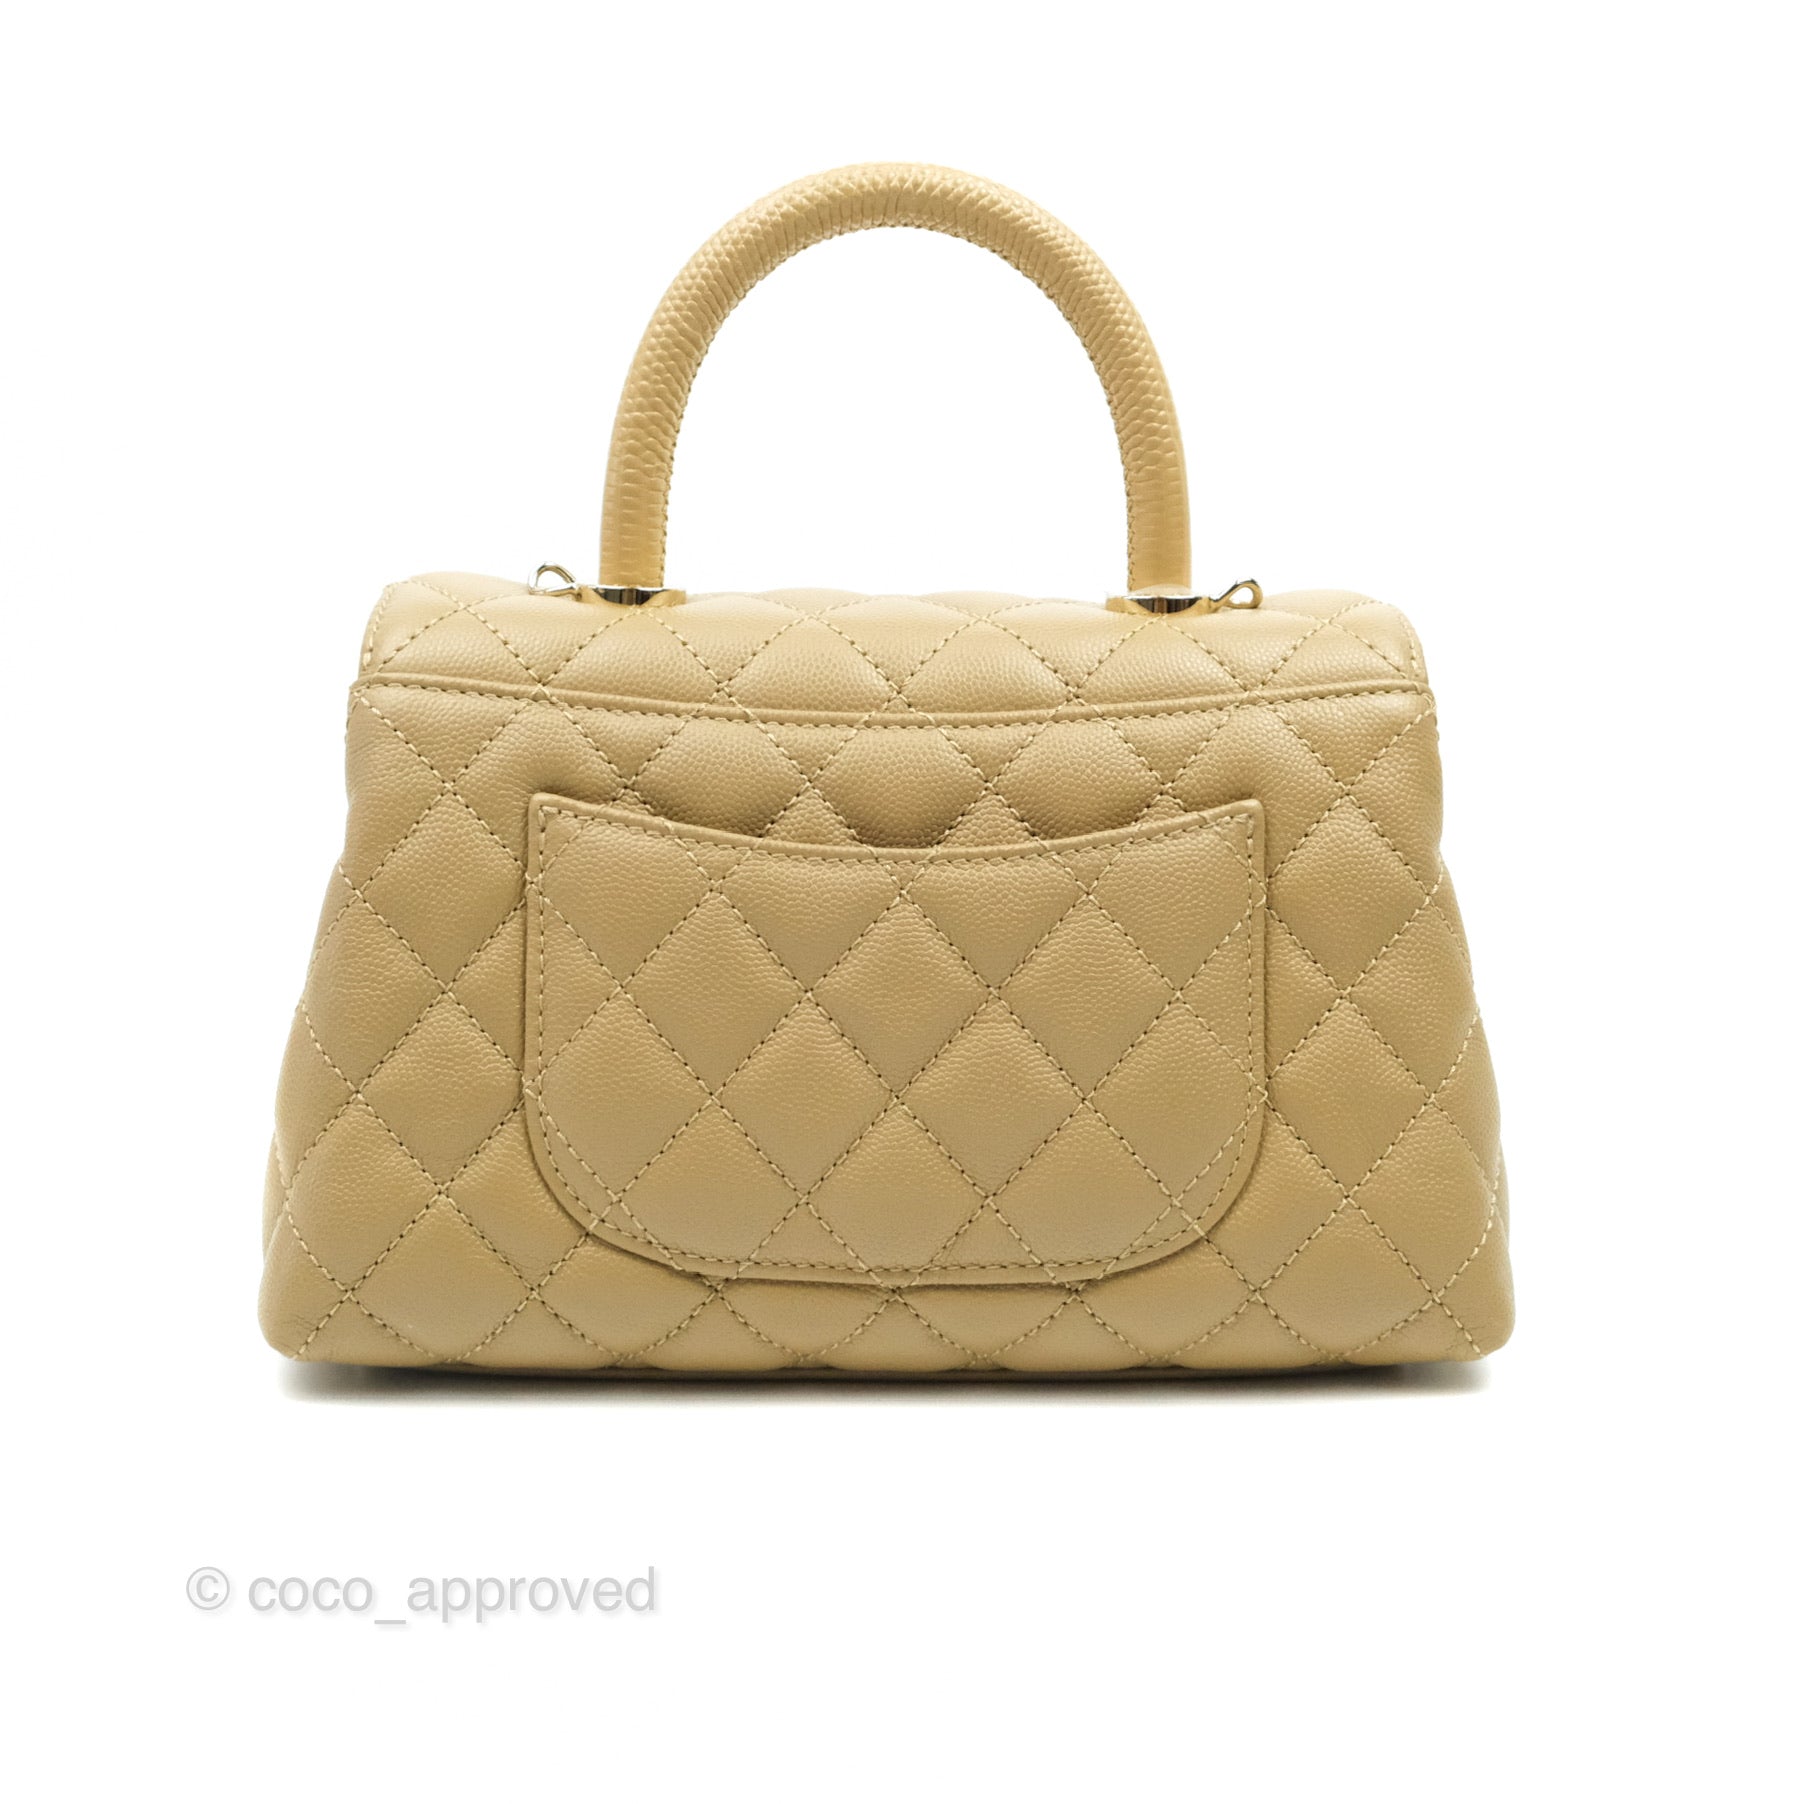 quilted purse chanel